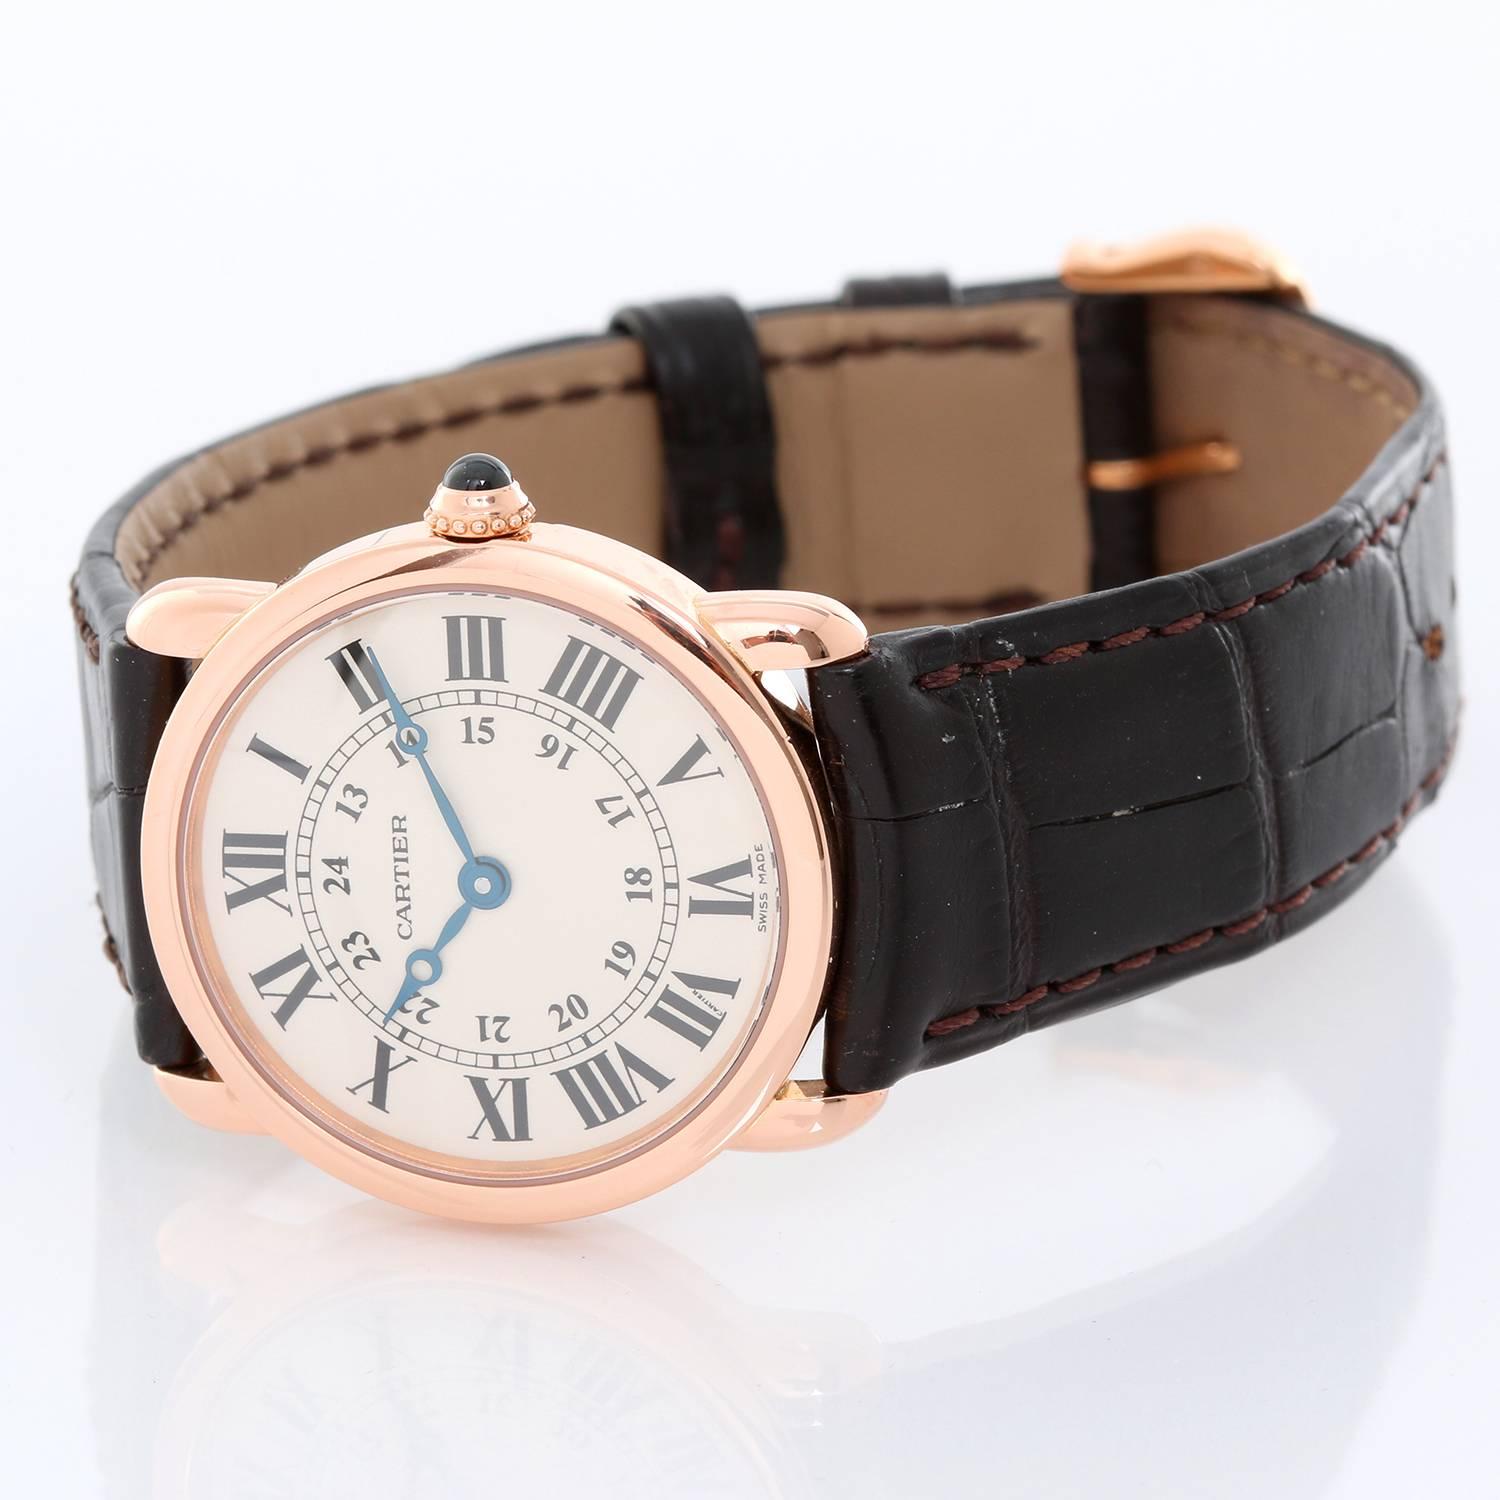 Cartier Solo Ronde Men's/Ladies 18K Rose Gold Quartz Watch W6701005 -  Quartz. 18K Rose Gold (29 mm diameter). Ivory dial with black Roman numerals.  Leather Cartier Strap with buckle. Pre-owned with custom box.